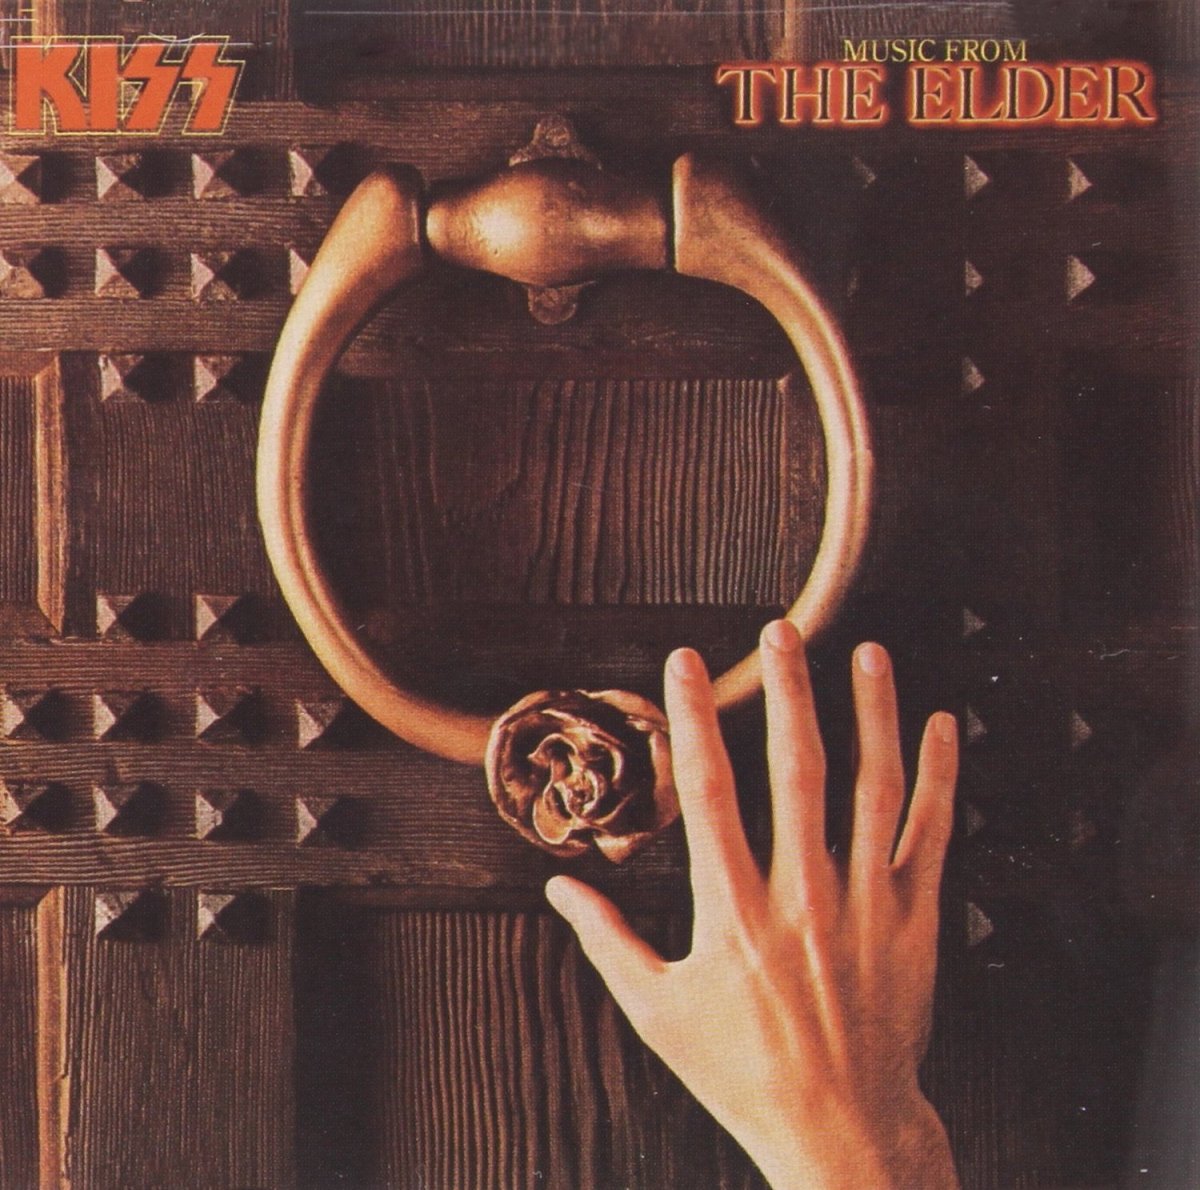 Music From the Elder: A Kiss Album That's Better Than You've Been 